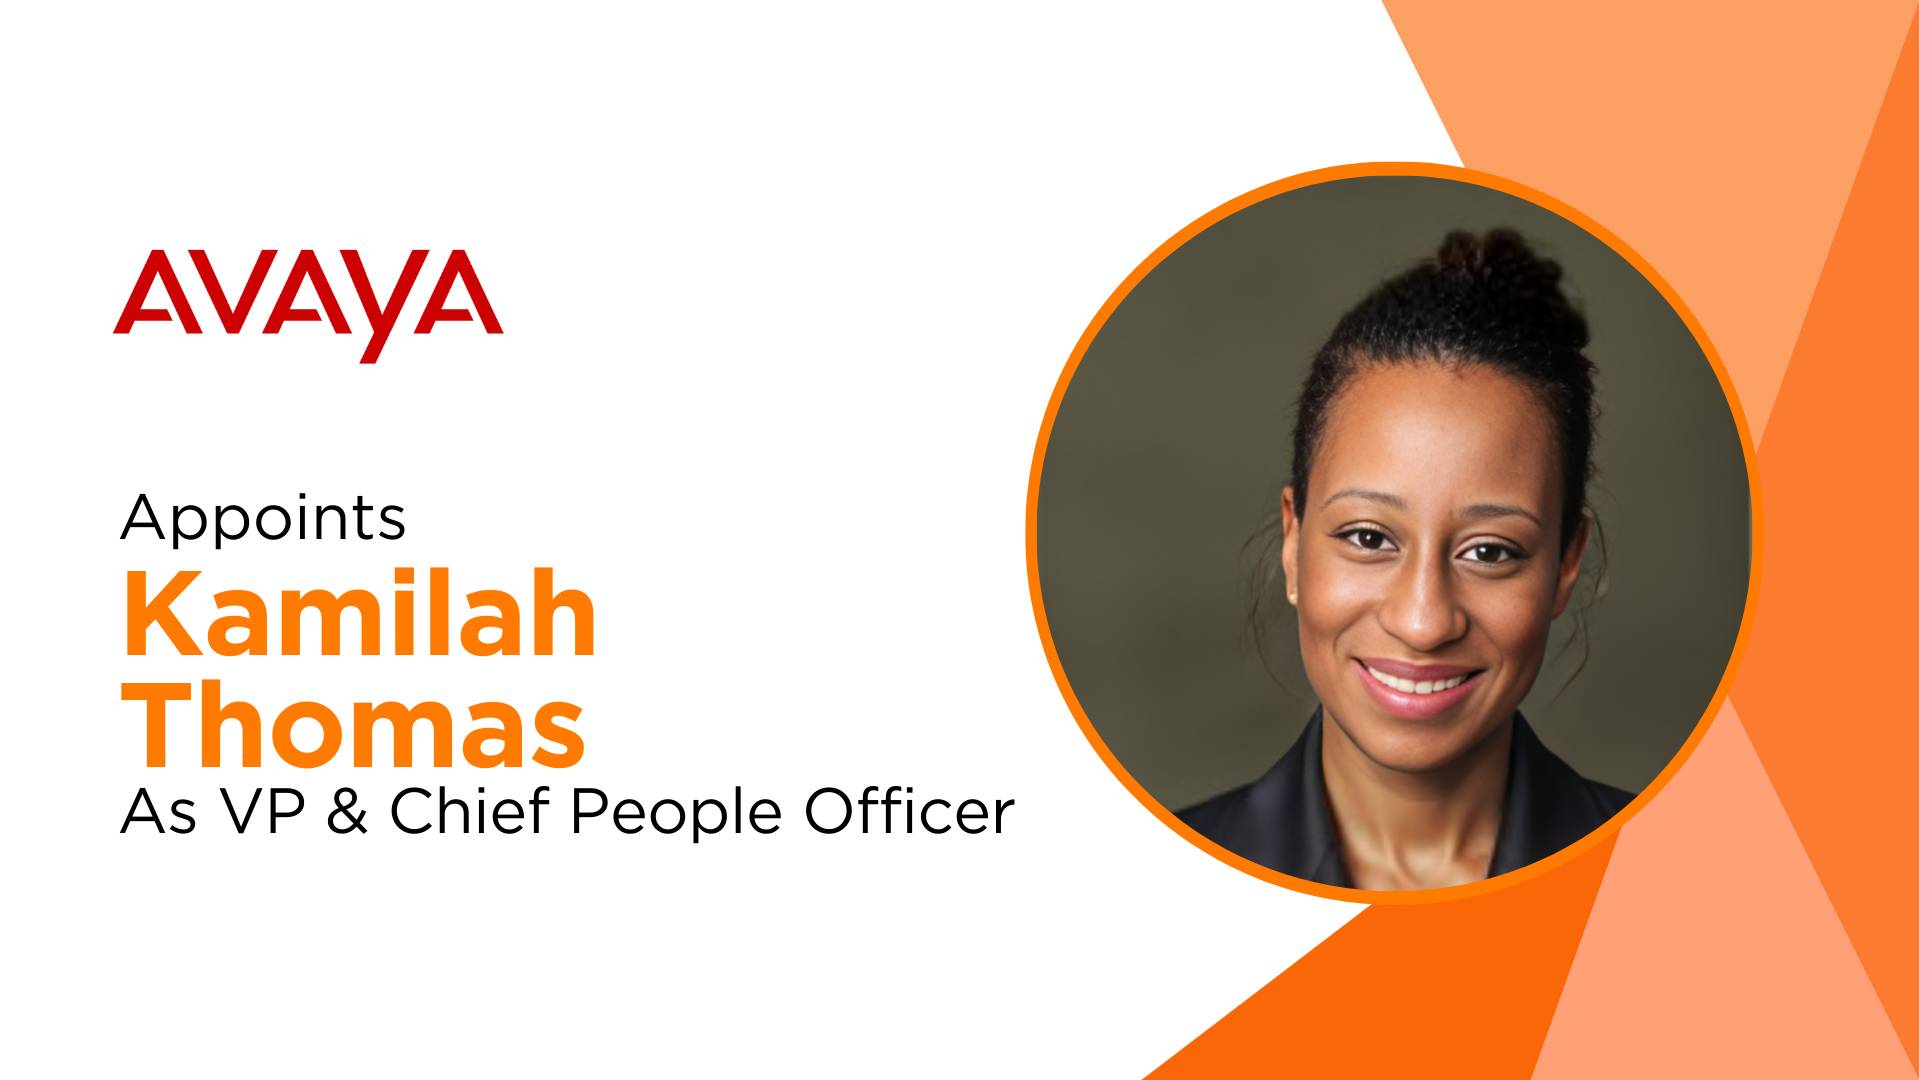 Avaya Appoints Kamilah Thomas as Senior VP and Chief People Officer to Drive DEI&B and Culture Transformation